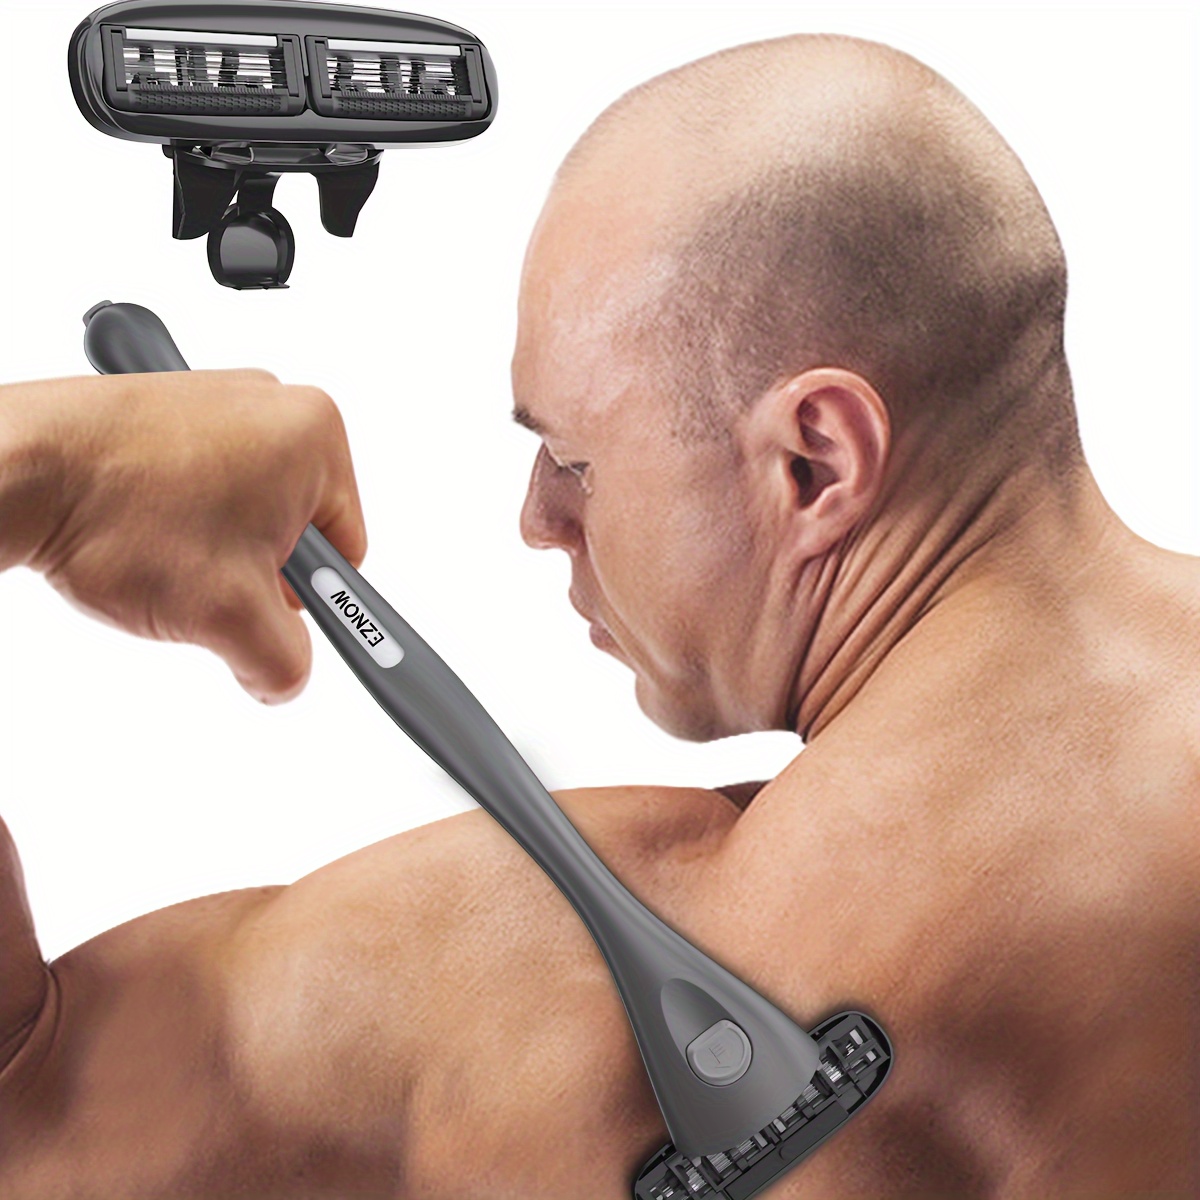 

Diy Back Shaver For Men - Mens Back Shaver With Ergonomic Long Handle, Included Replacement Extra Blade For Full Body Hair Shaver, Back & Body Hair Trimmer (shave Wet Or Dry)